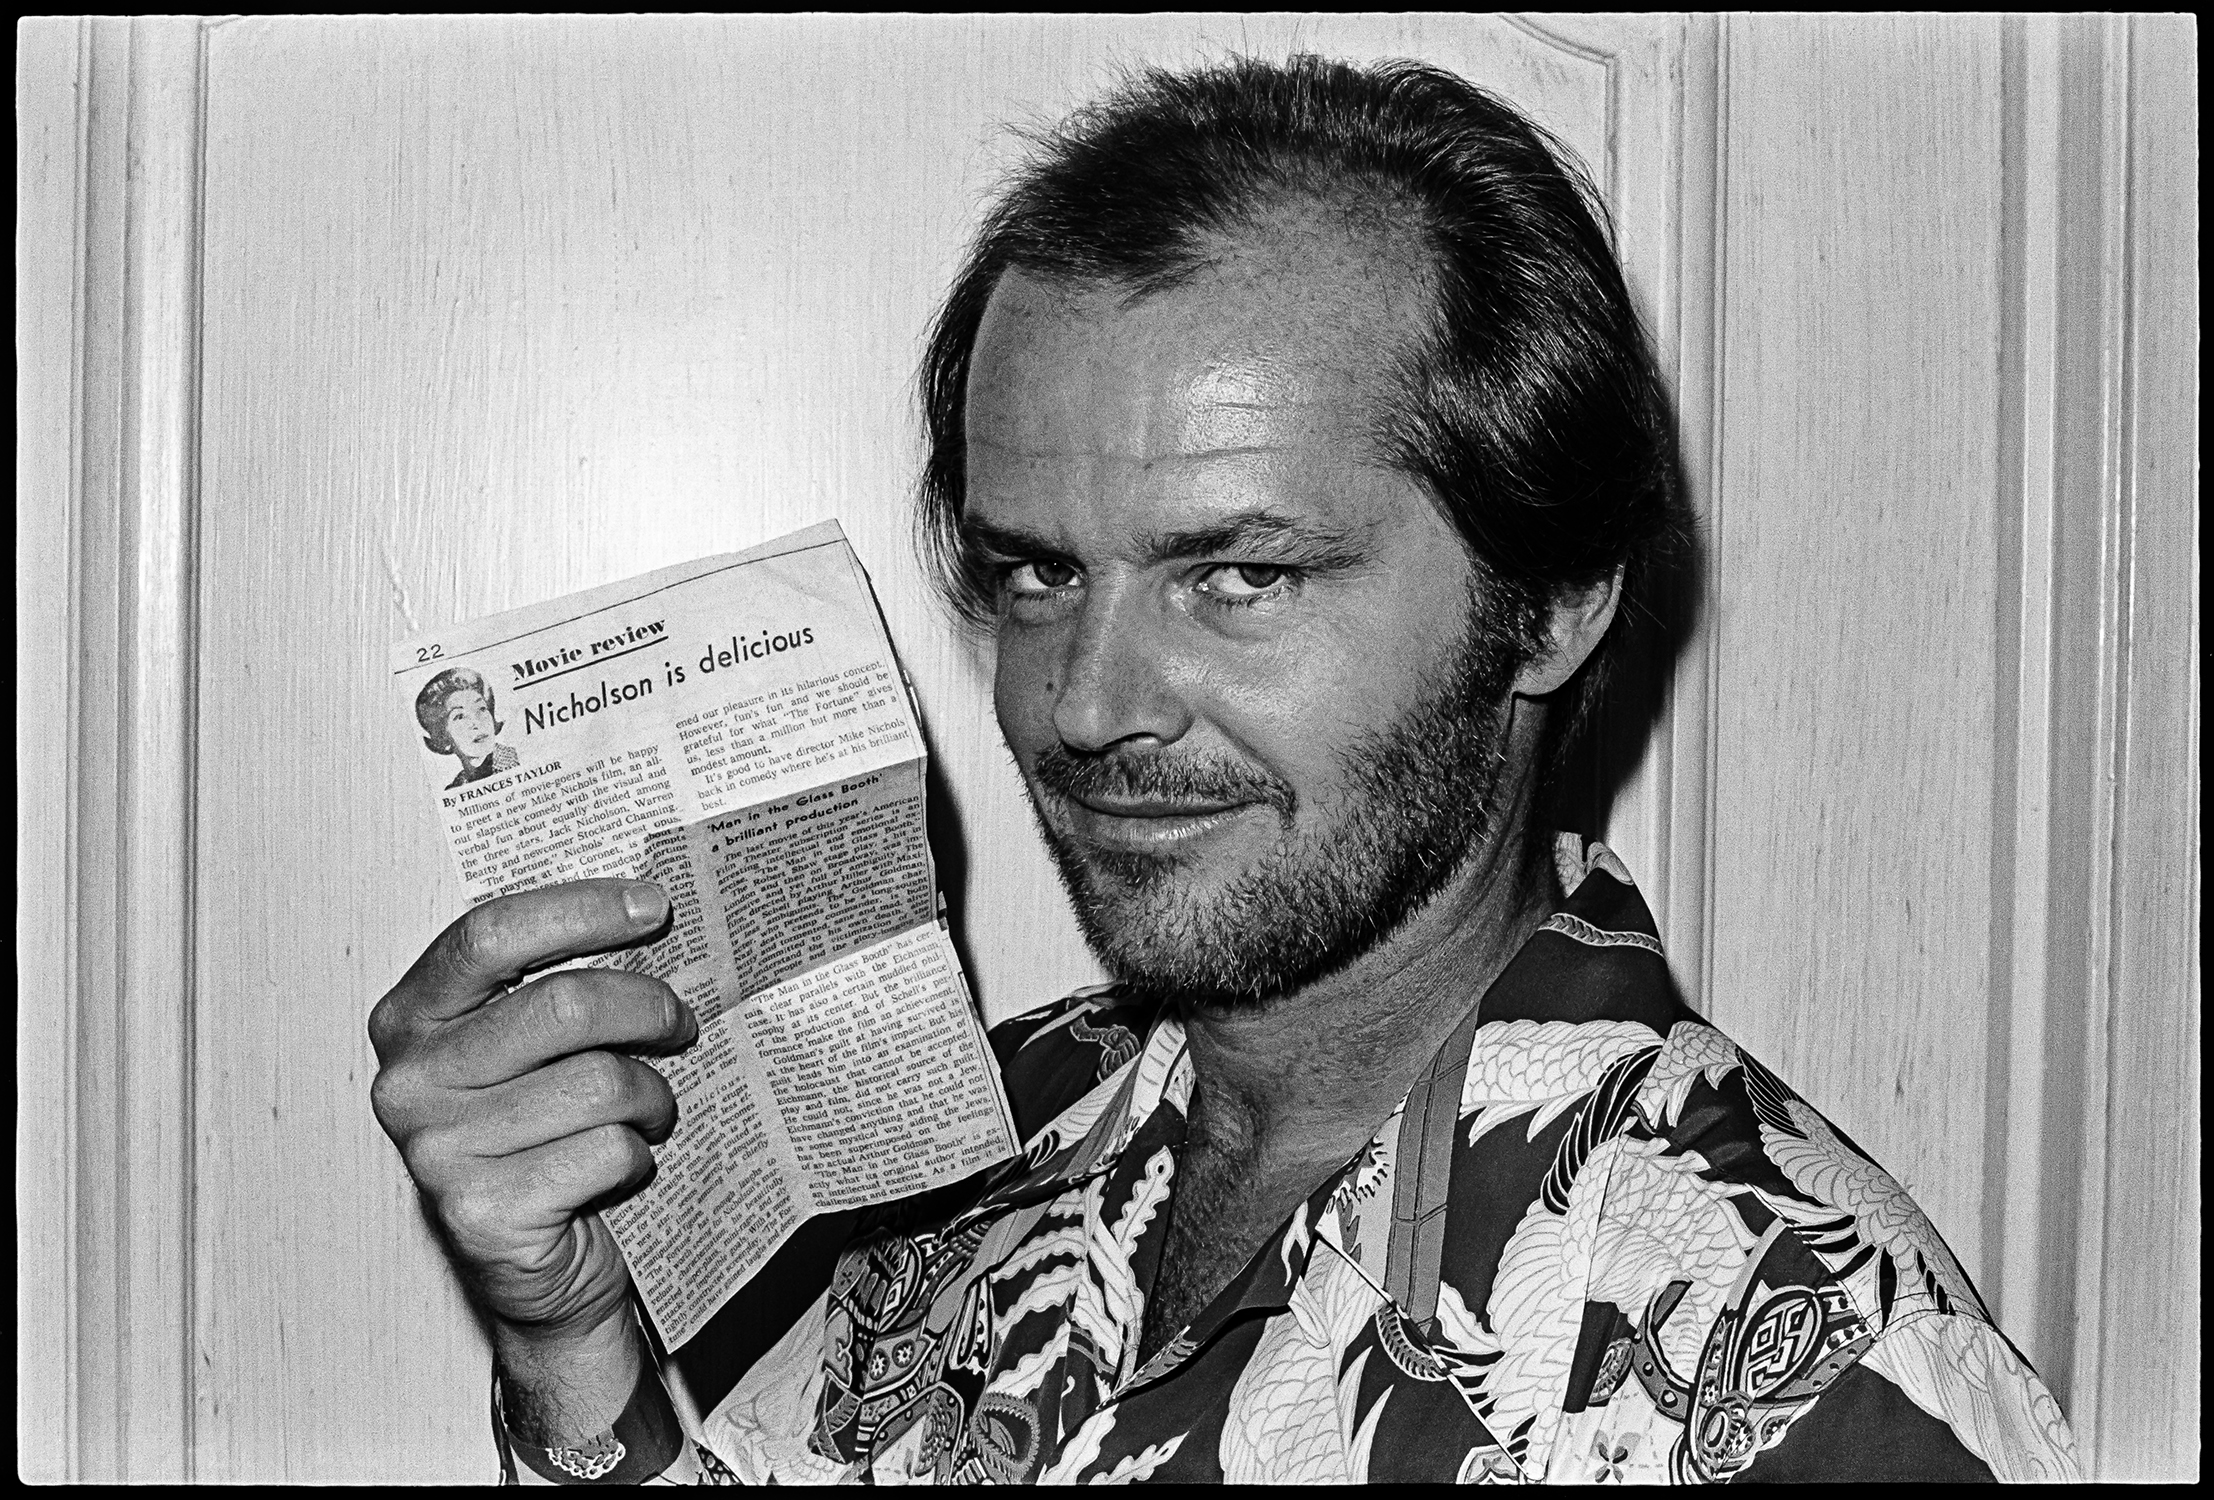 A man with a sly grin, wearing a printed shirt, holds a newspaper with a review titled "Nicholson is delicious."